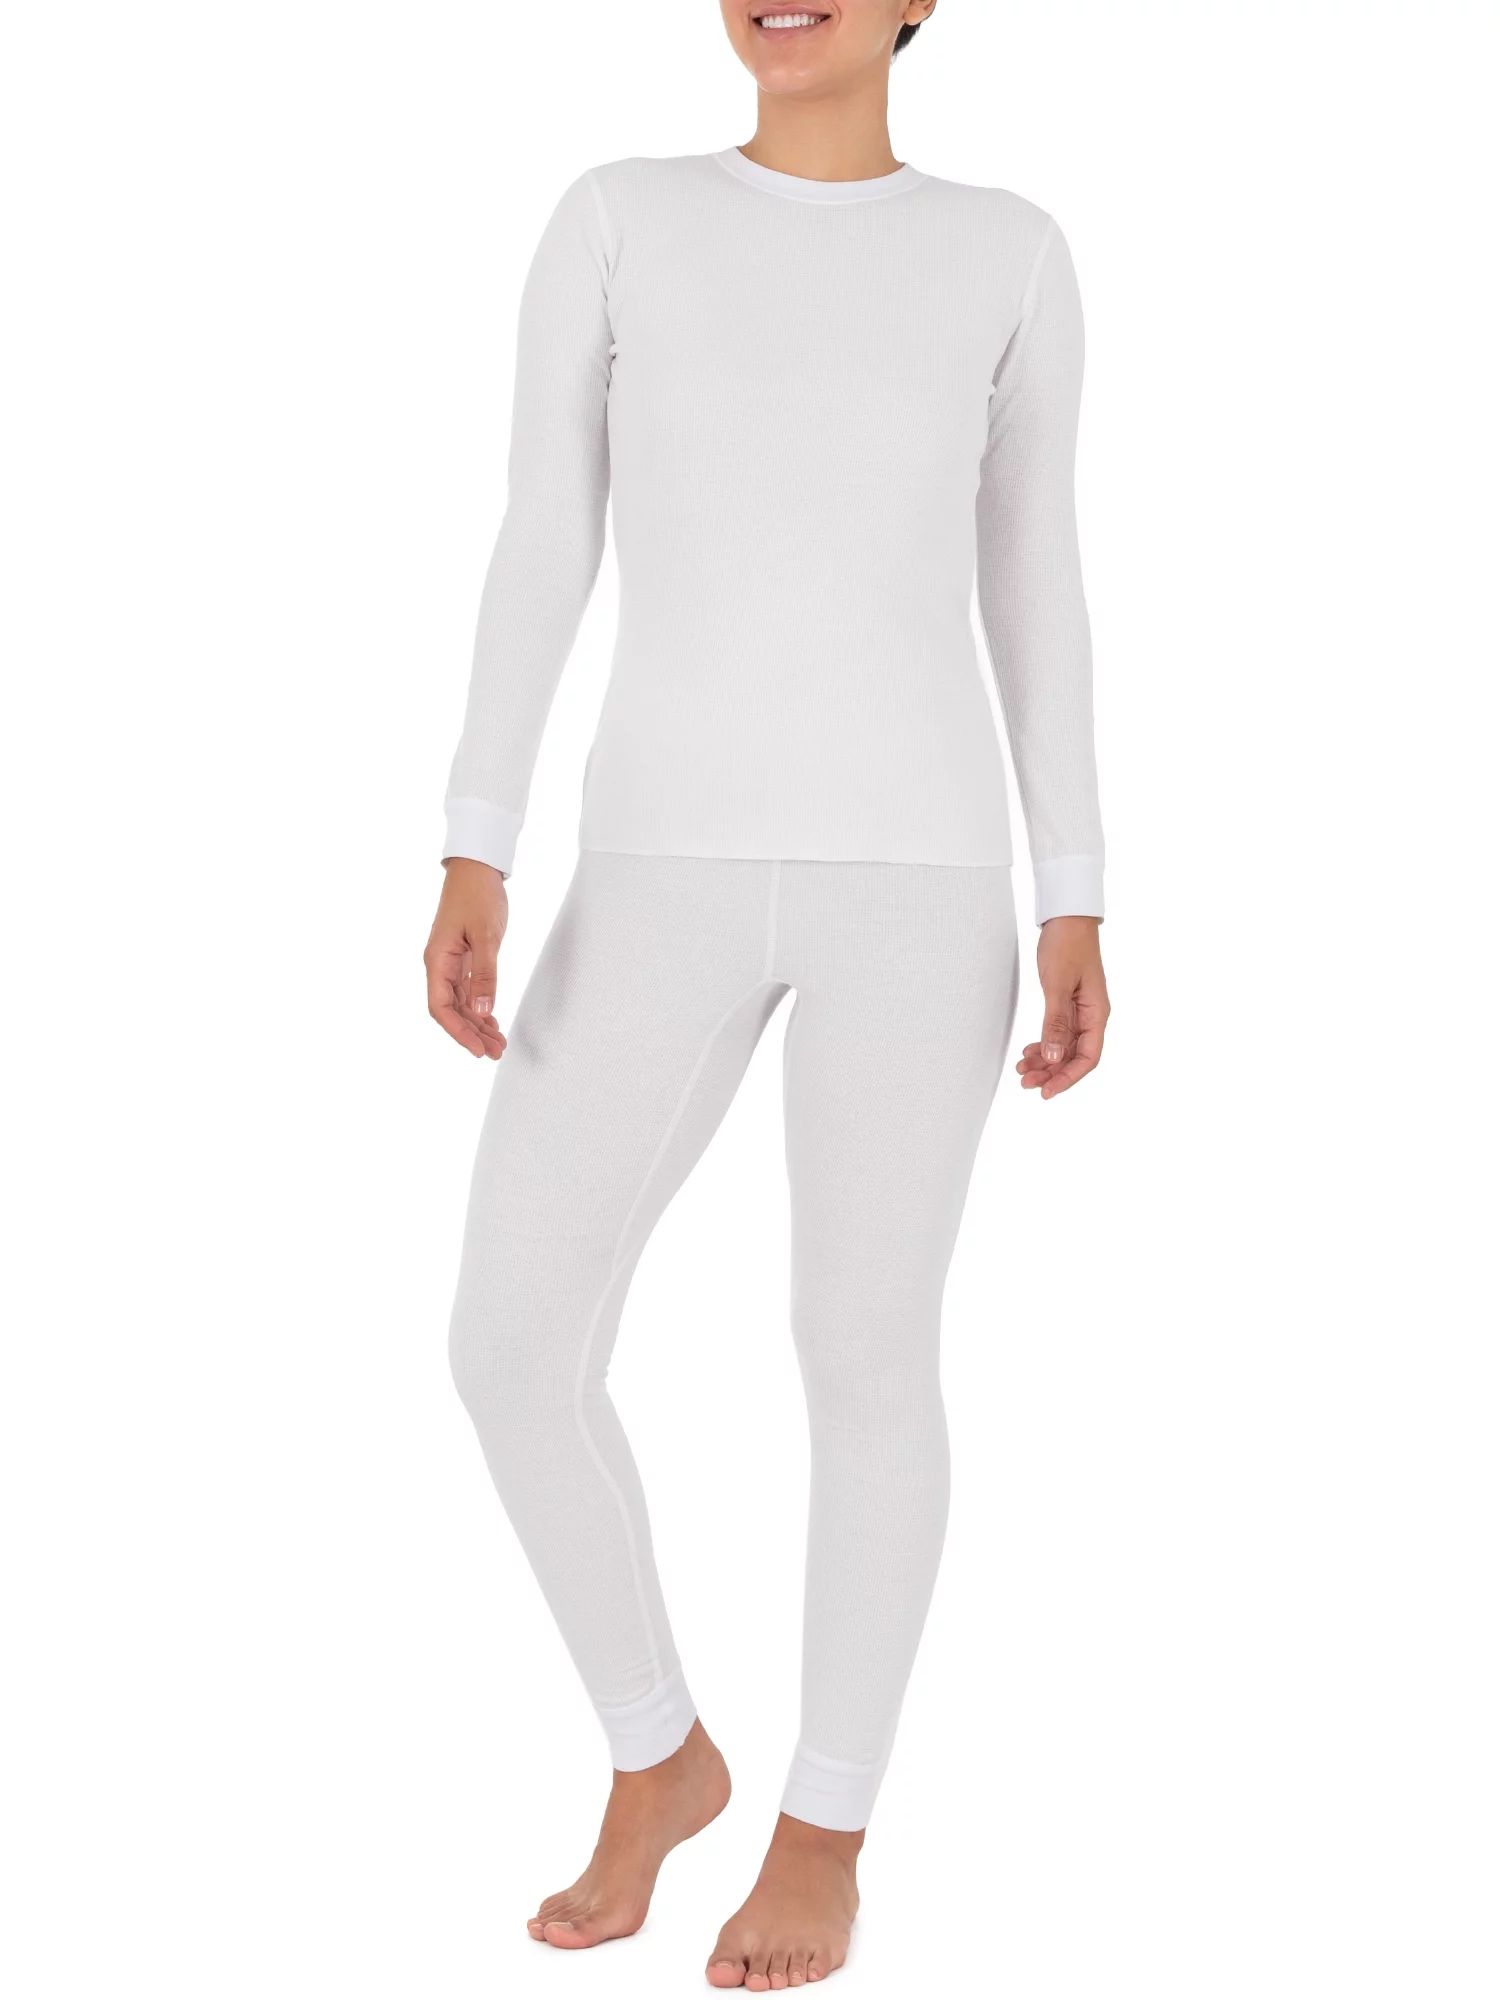 Fruit of the Loom Women's and Women's Plus Long Underwear Thermal Waffle Top and Bottom Set | Walmart (US)